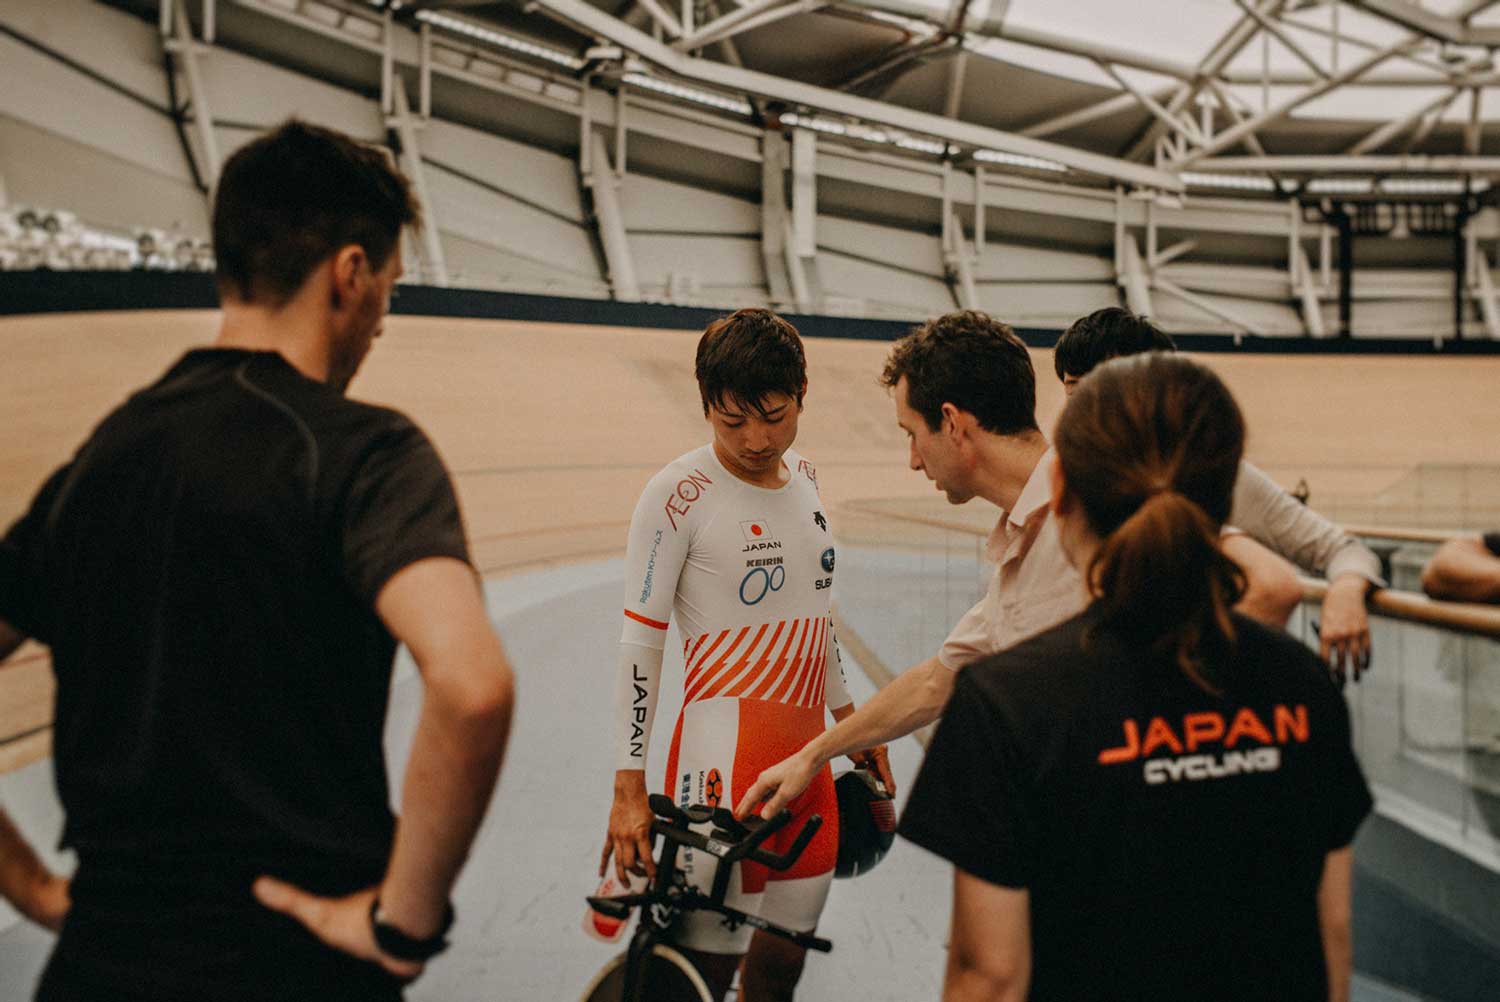 Japanese cyclist discusses performance with coaches after training in velodrome